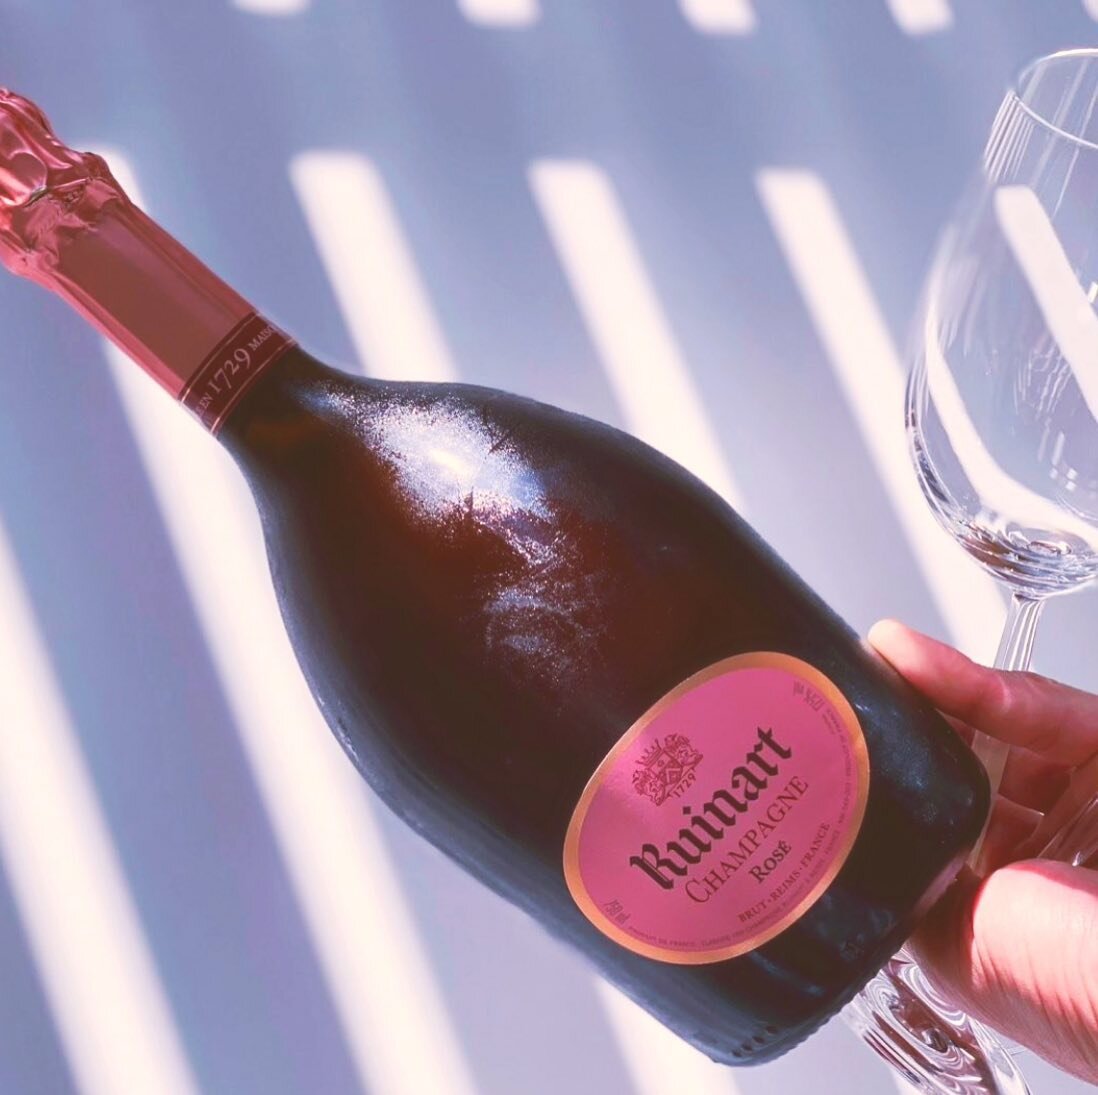 W I N E 🥂 W E D N E S D A Y | | What&rsquo;s in your glass? @ruinart 

Three Fun Facts About Ruinart:

📌 Nicolas Ruinart created the very first wine house in #Champagne devoted to the production of sparkling wine in 1729. 

📌 In 1768, Claude Ruina